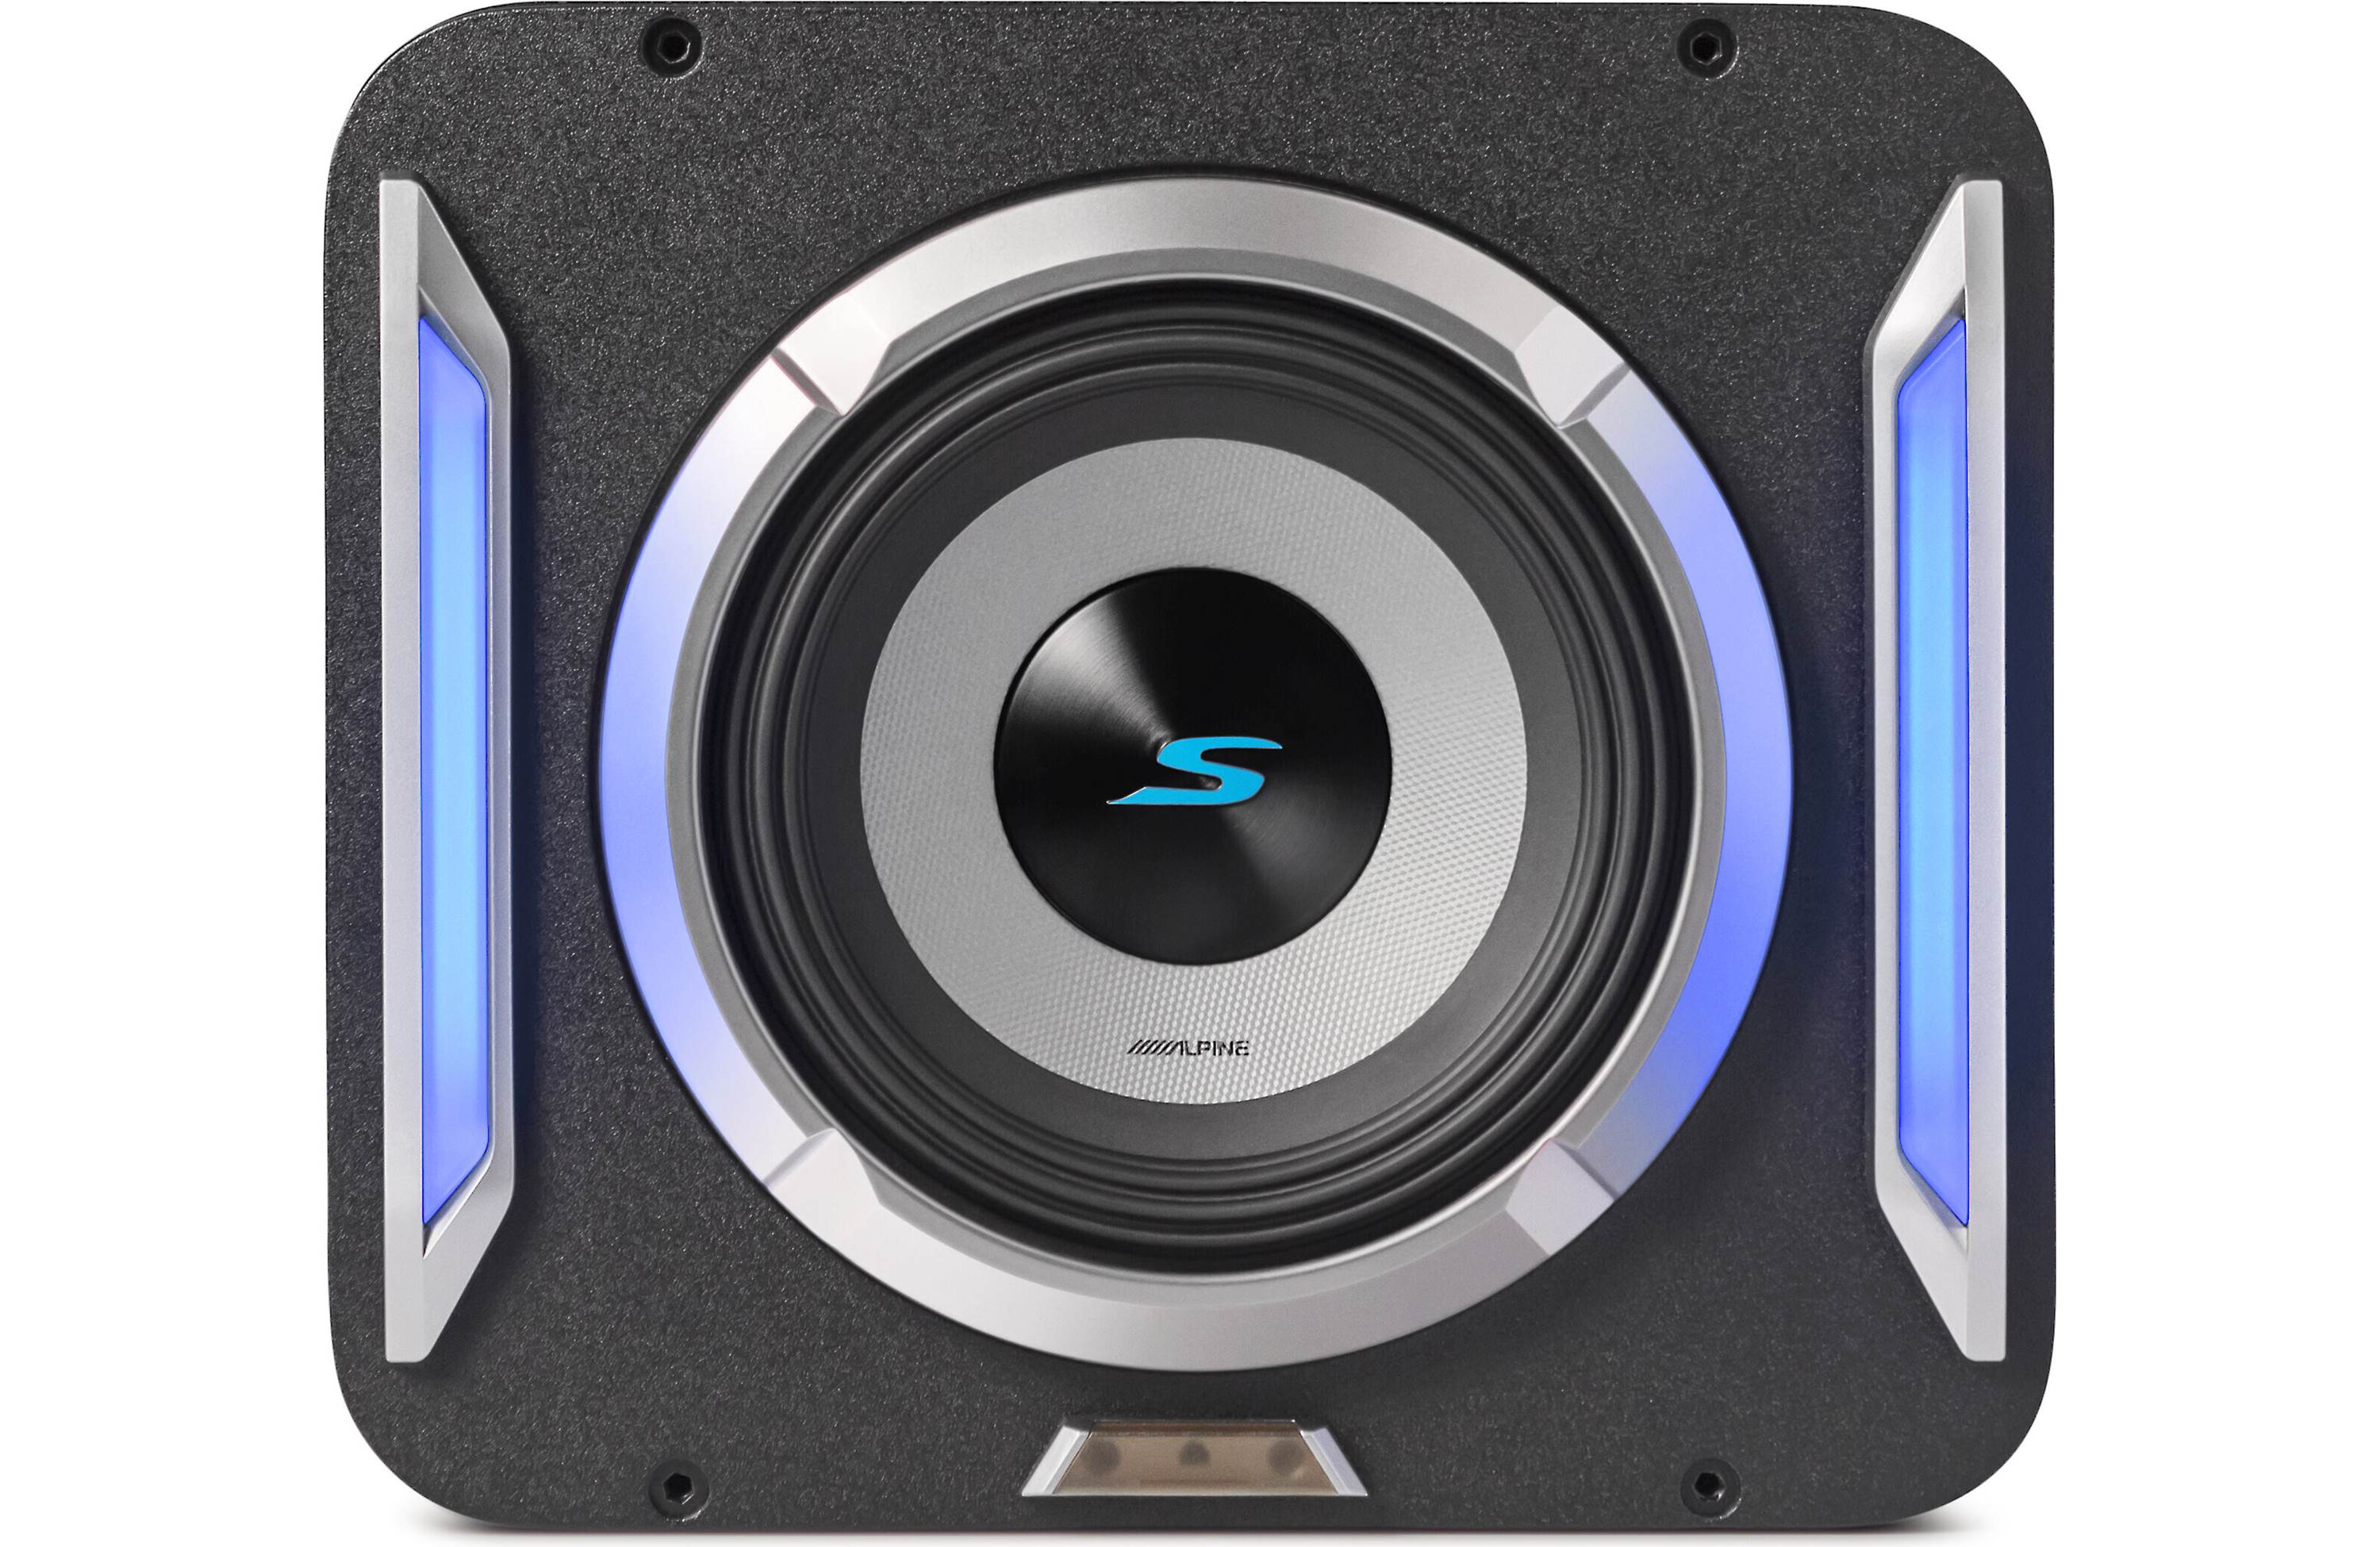 Alpine S2-SB8 PrismaLink™ S2-Series sealed subwoofer enclosure with 8" subwoofer and RGB lighting